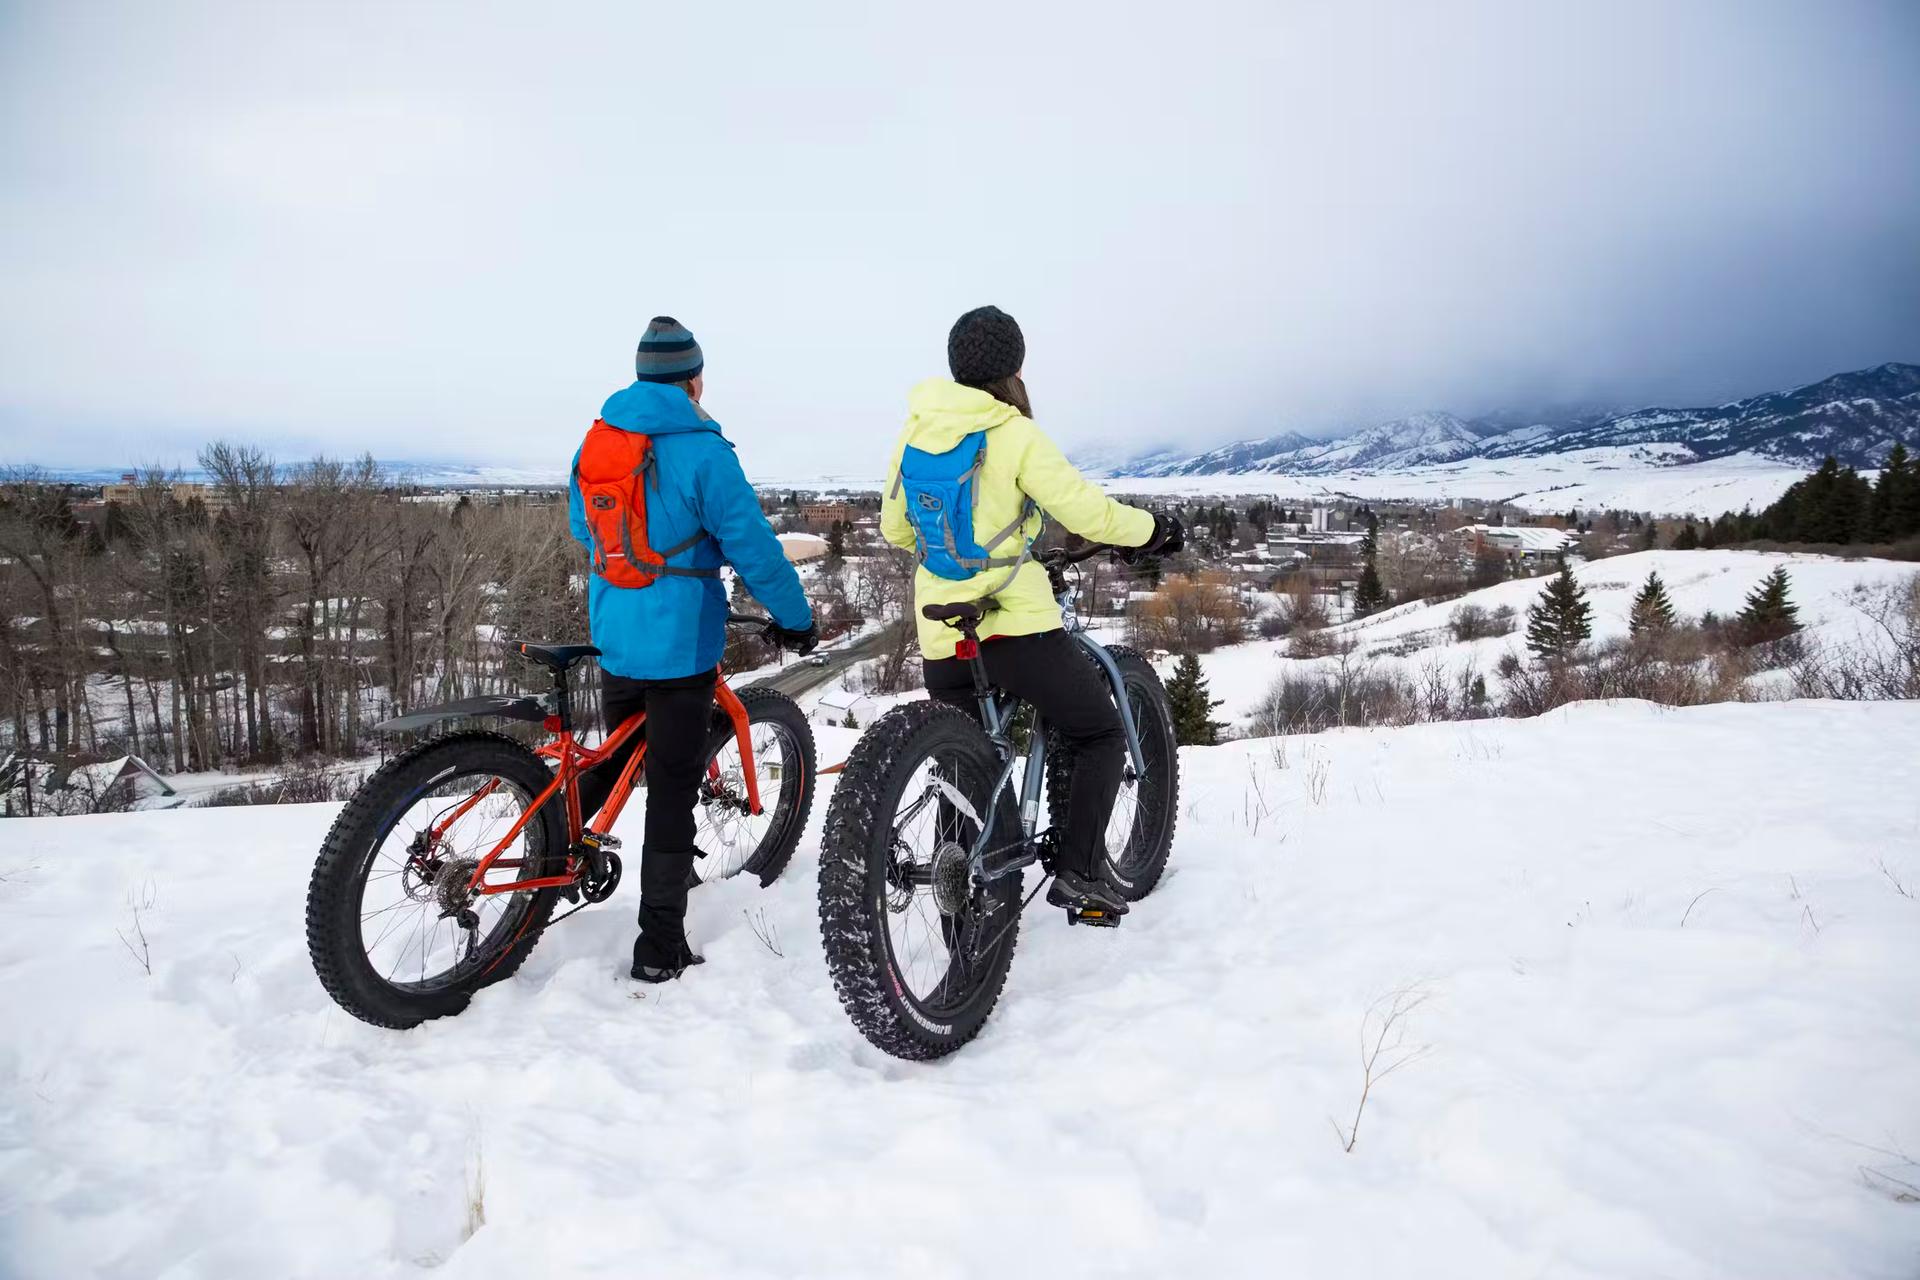 Two cyclists on fat bikes with wide tires pause to look across a snowy landscape in Montana